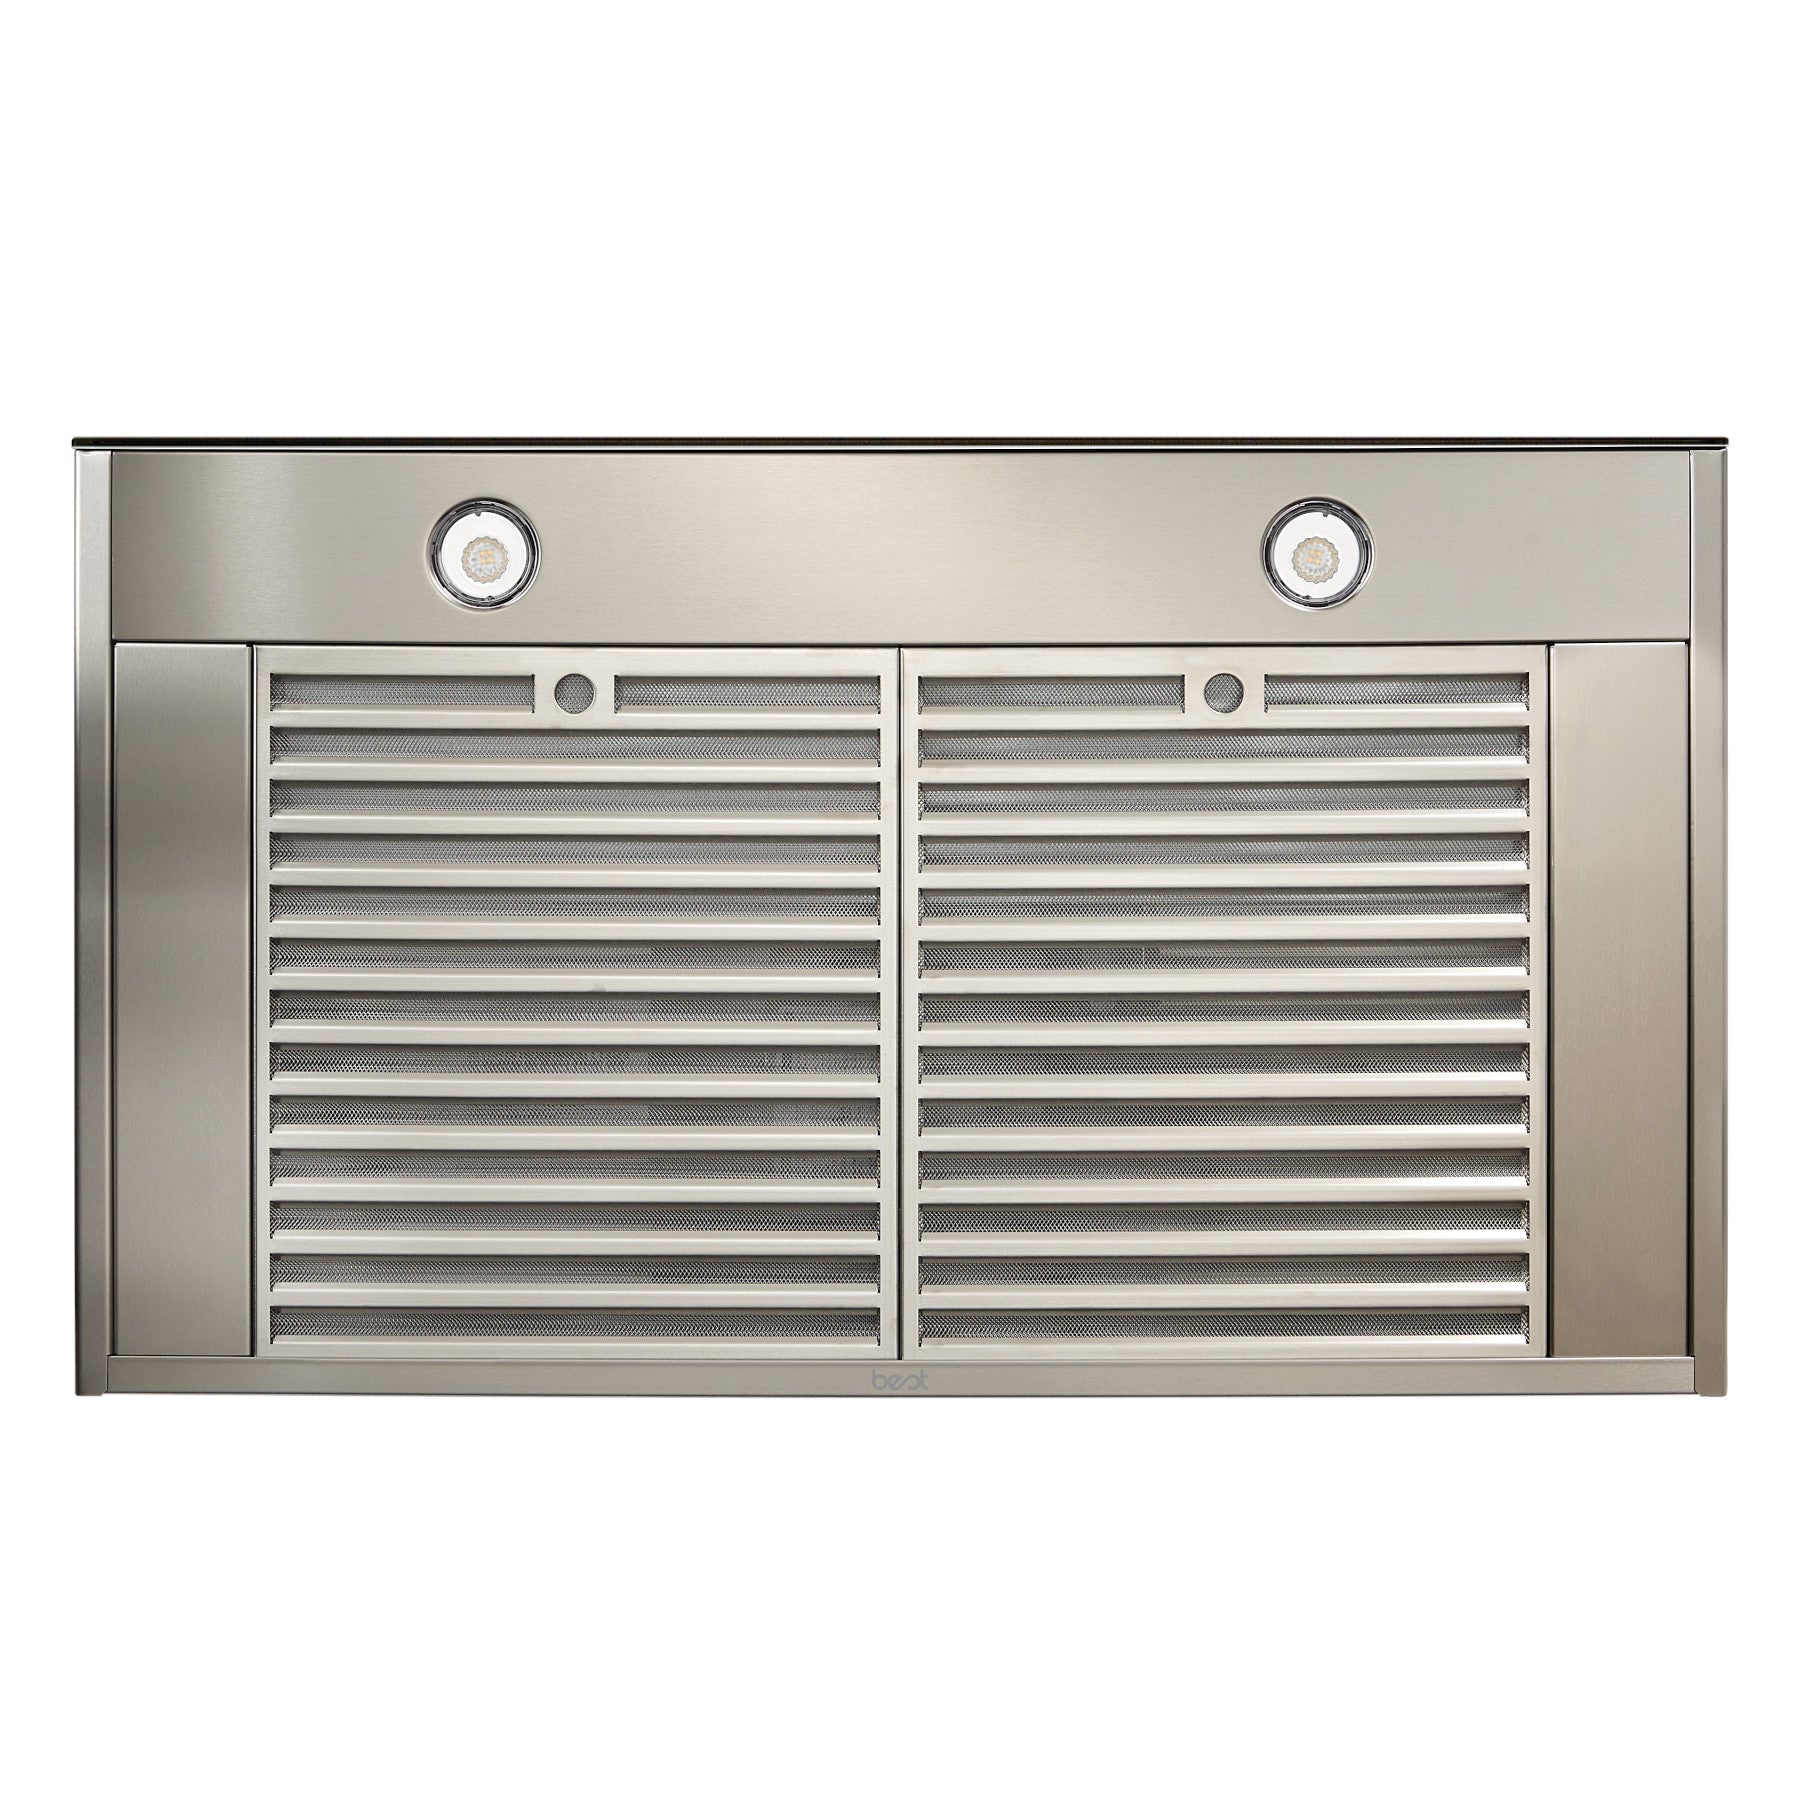 Best - 36 Inch 650 CFM Wall Mount and Chimney Range Vent in Stainless - WCB3I36SBB